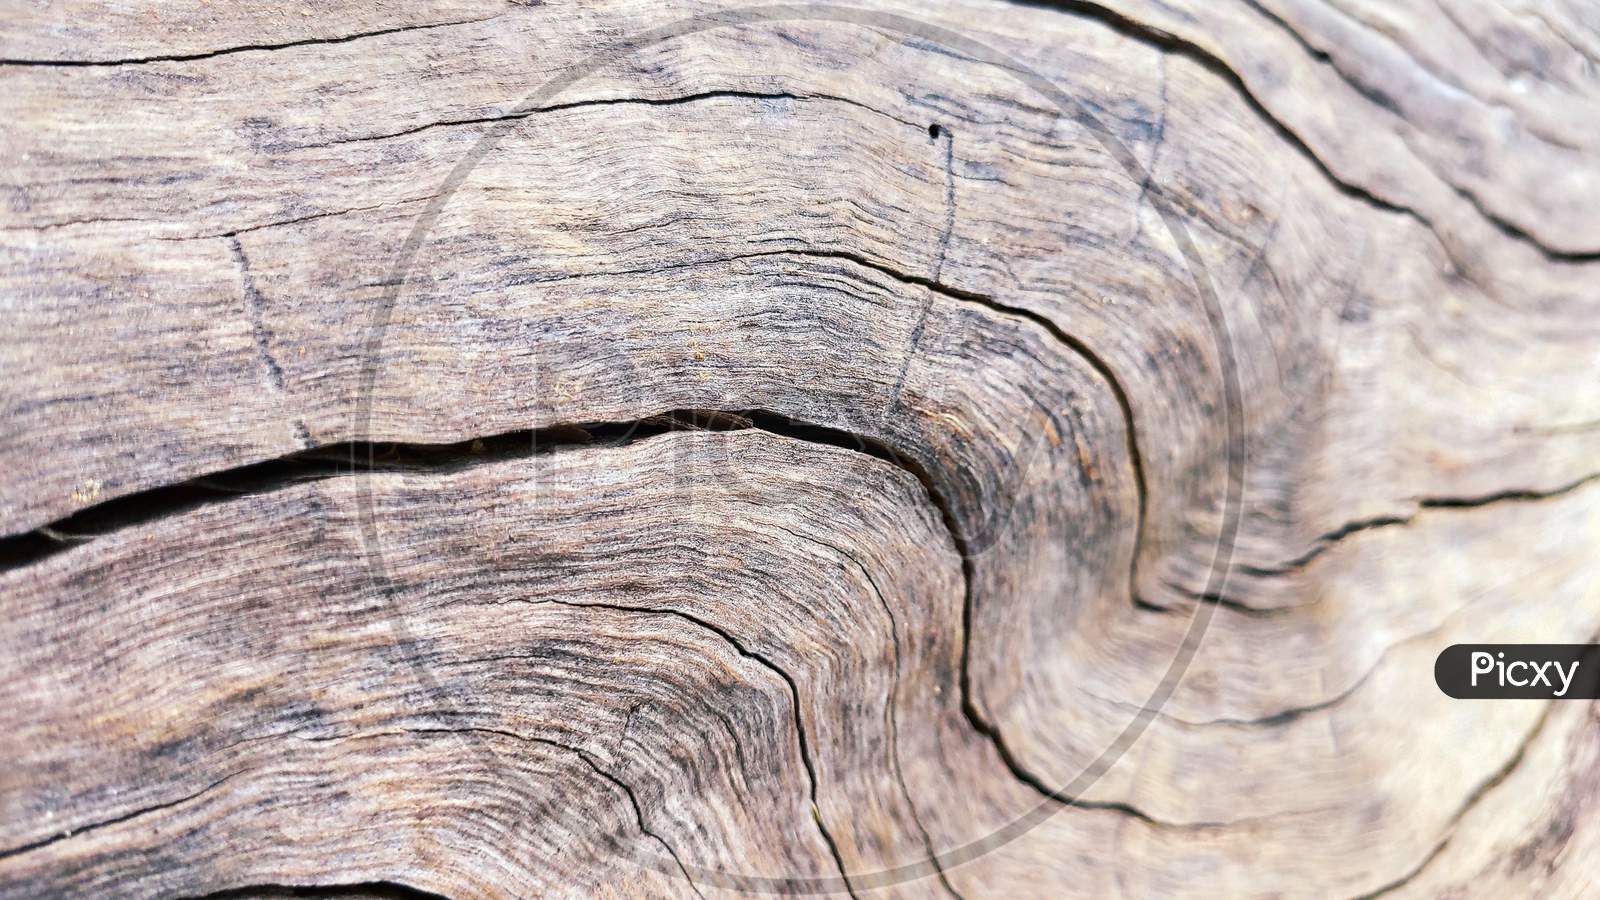 Crack marks on a wooden surface